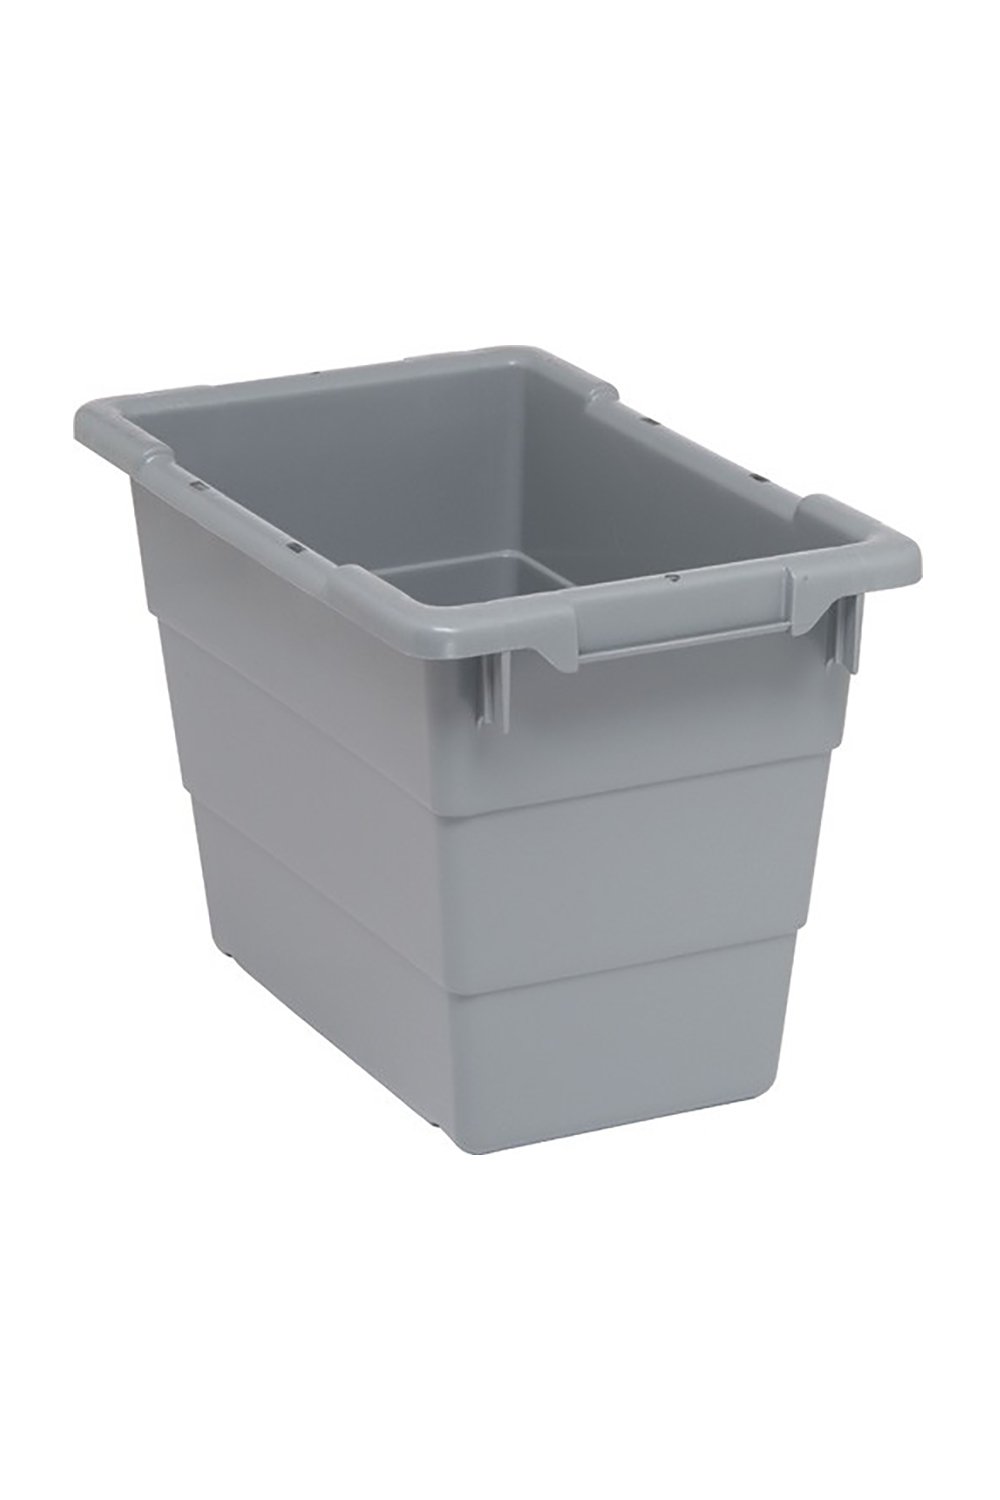 Cross Stack Tub Bins & Containers Acart 17-1/4"L x 11"W x 12"H Gray 